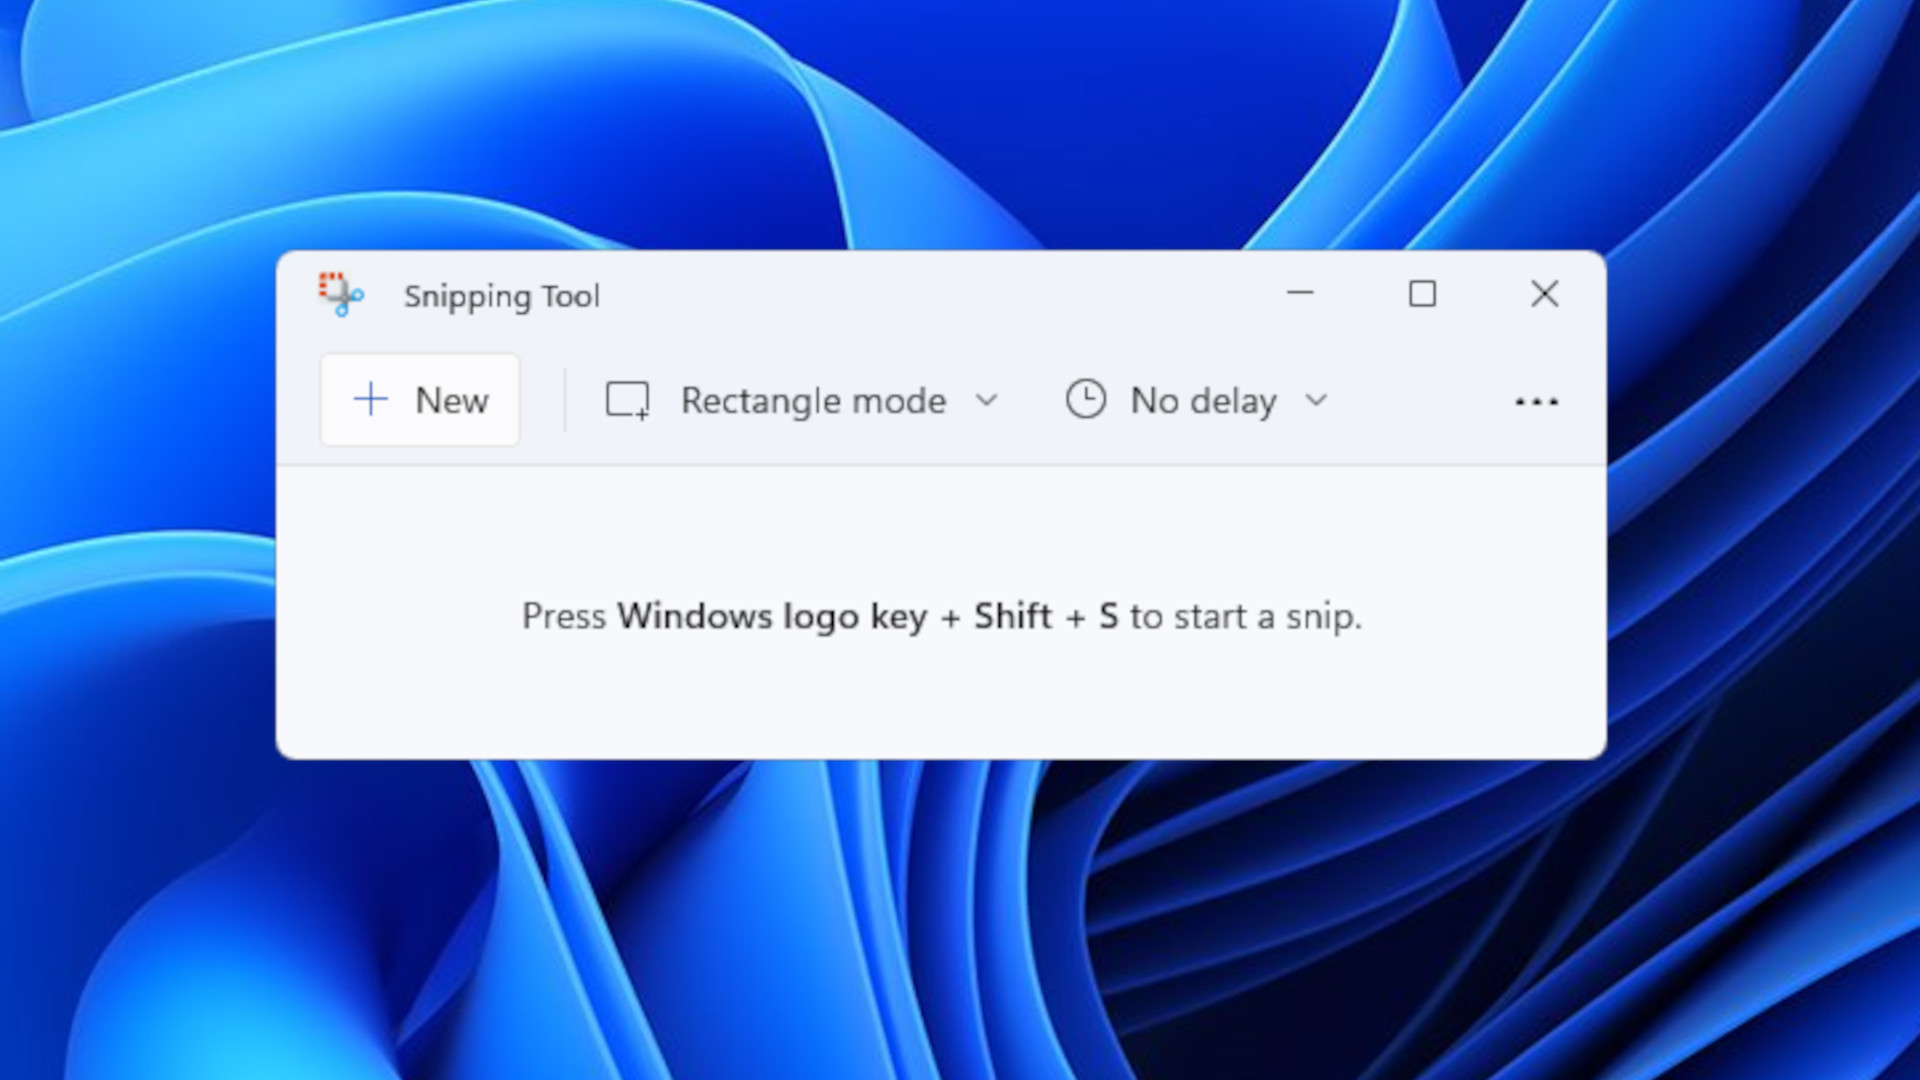 download snip and sketch windows 11